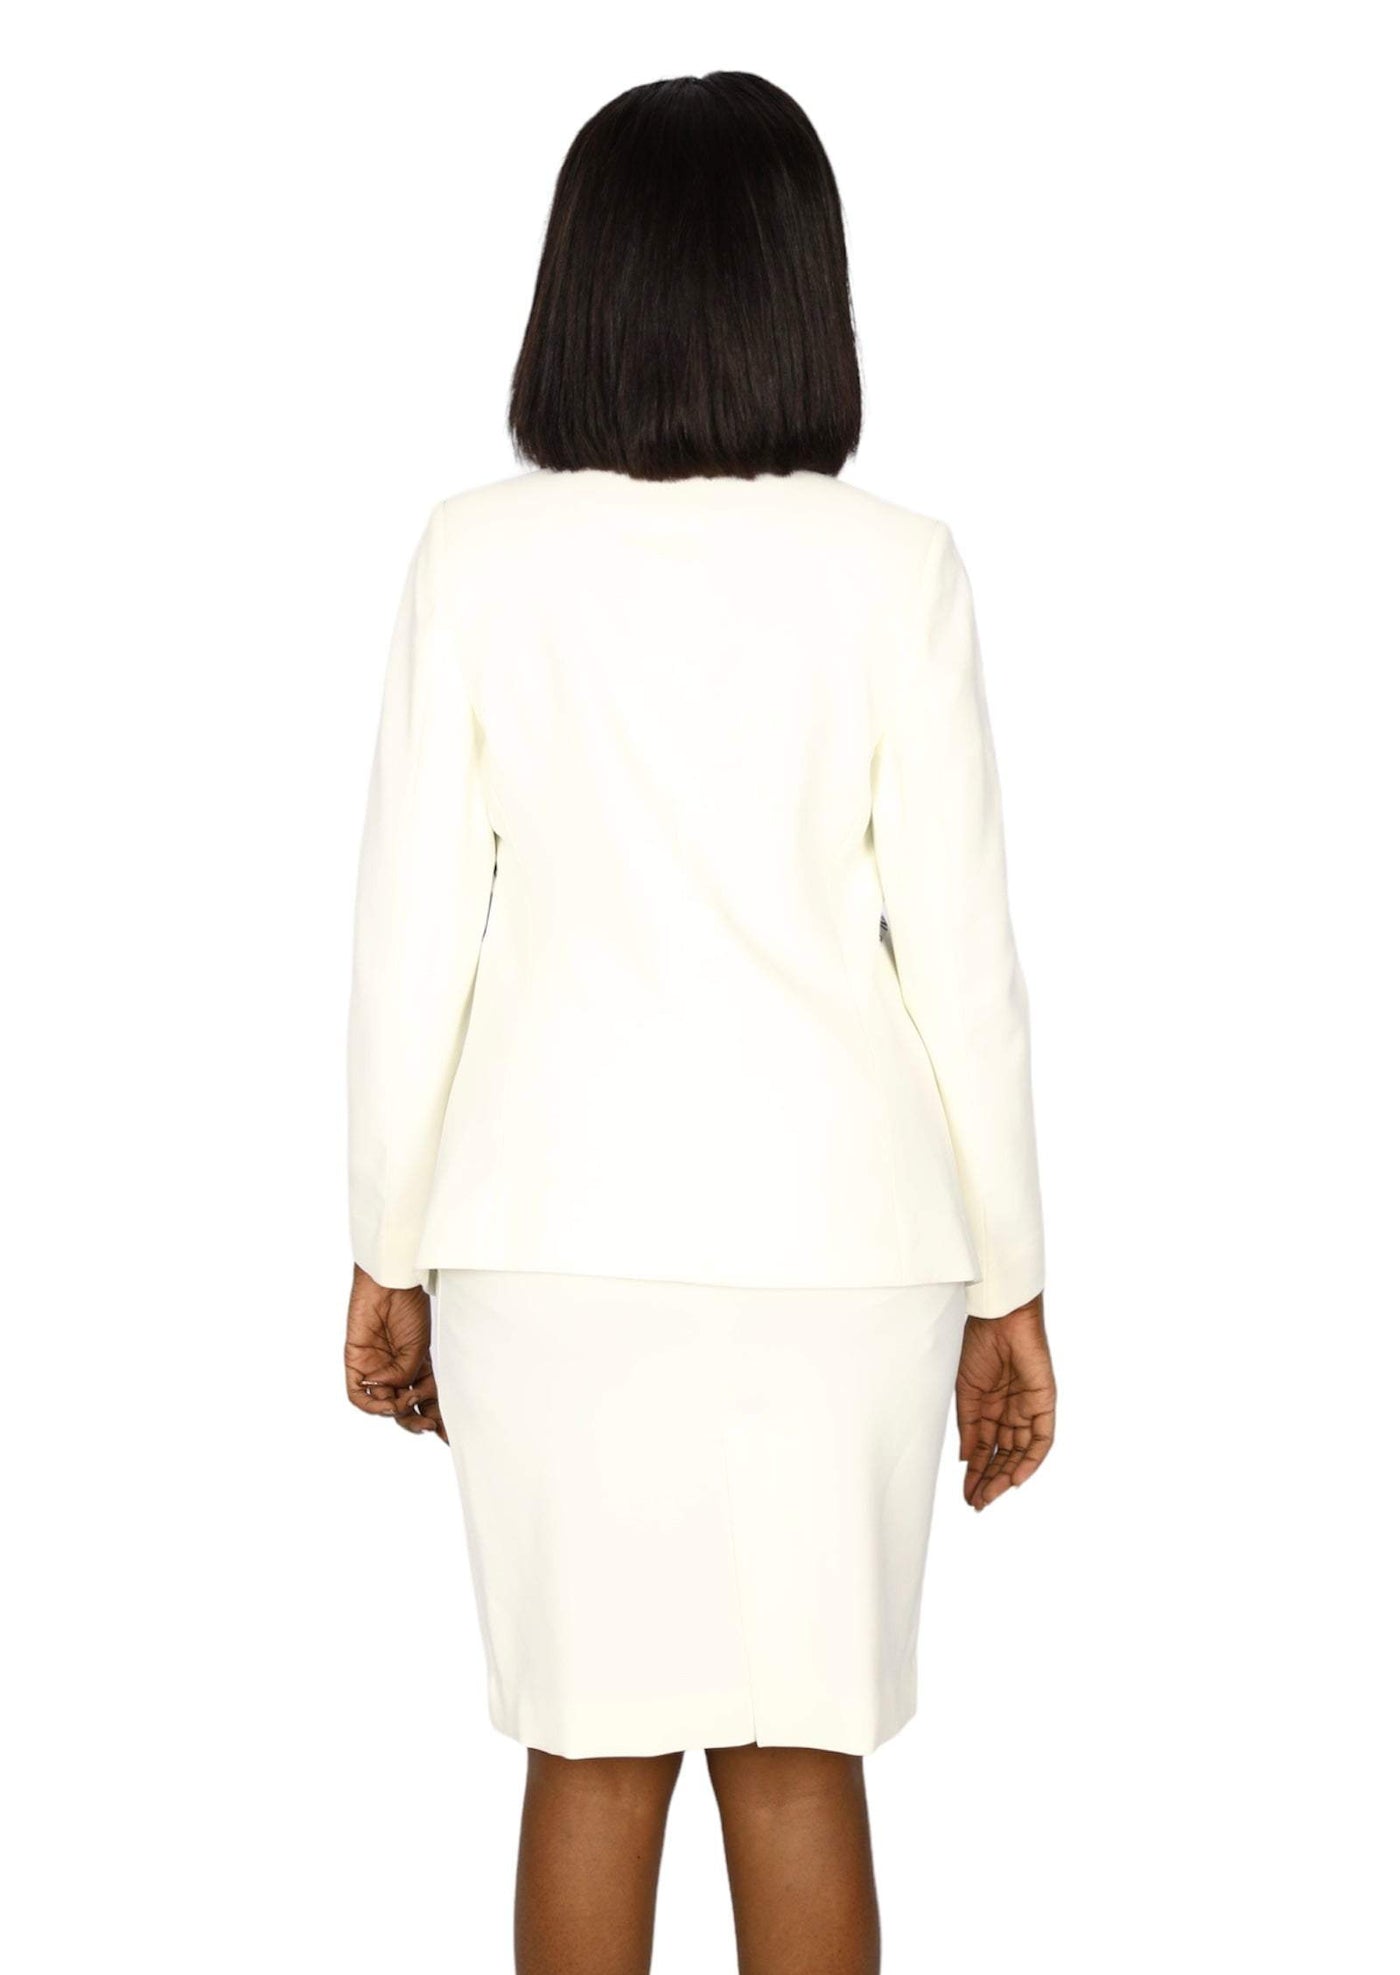 African Office White Skirt Suit-danddclothing-AFRICAN WEAR FOR WOMEN,Ladies Suits,White